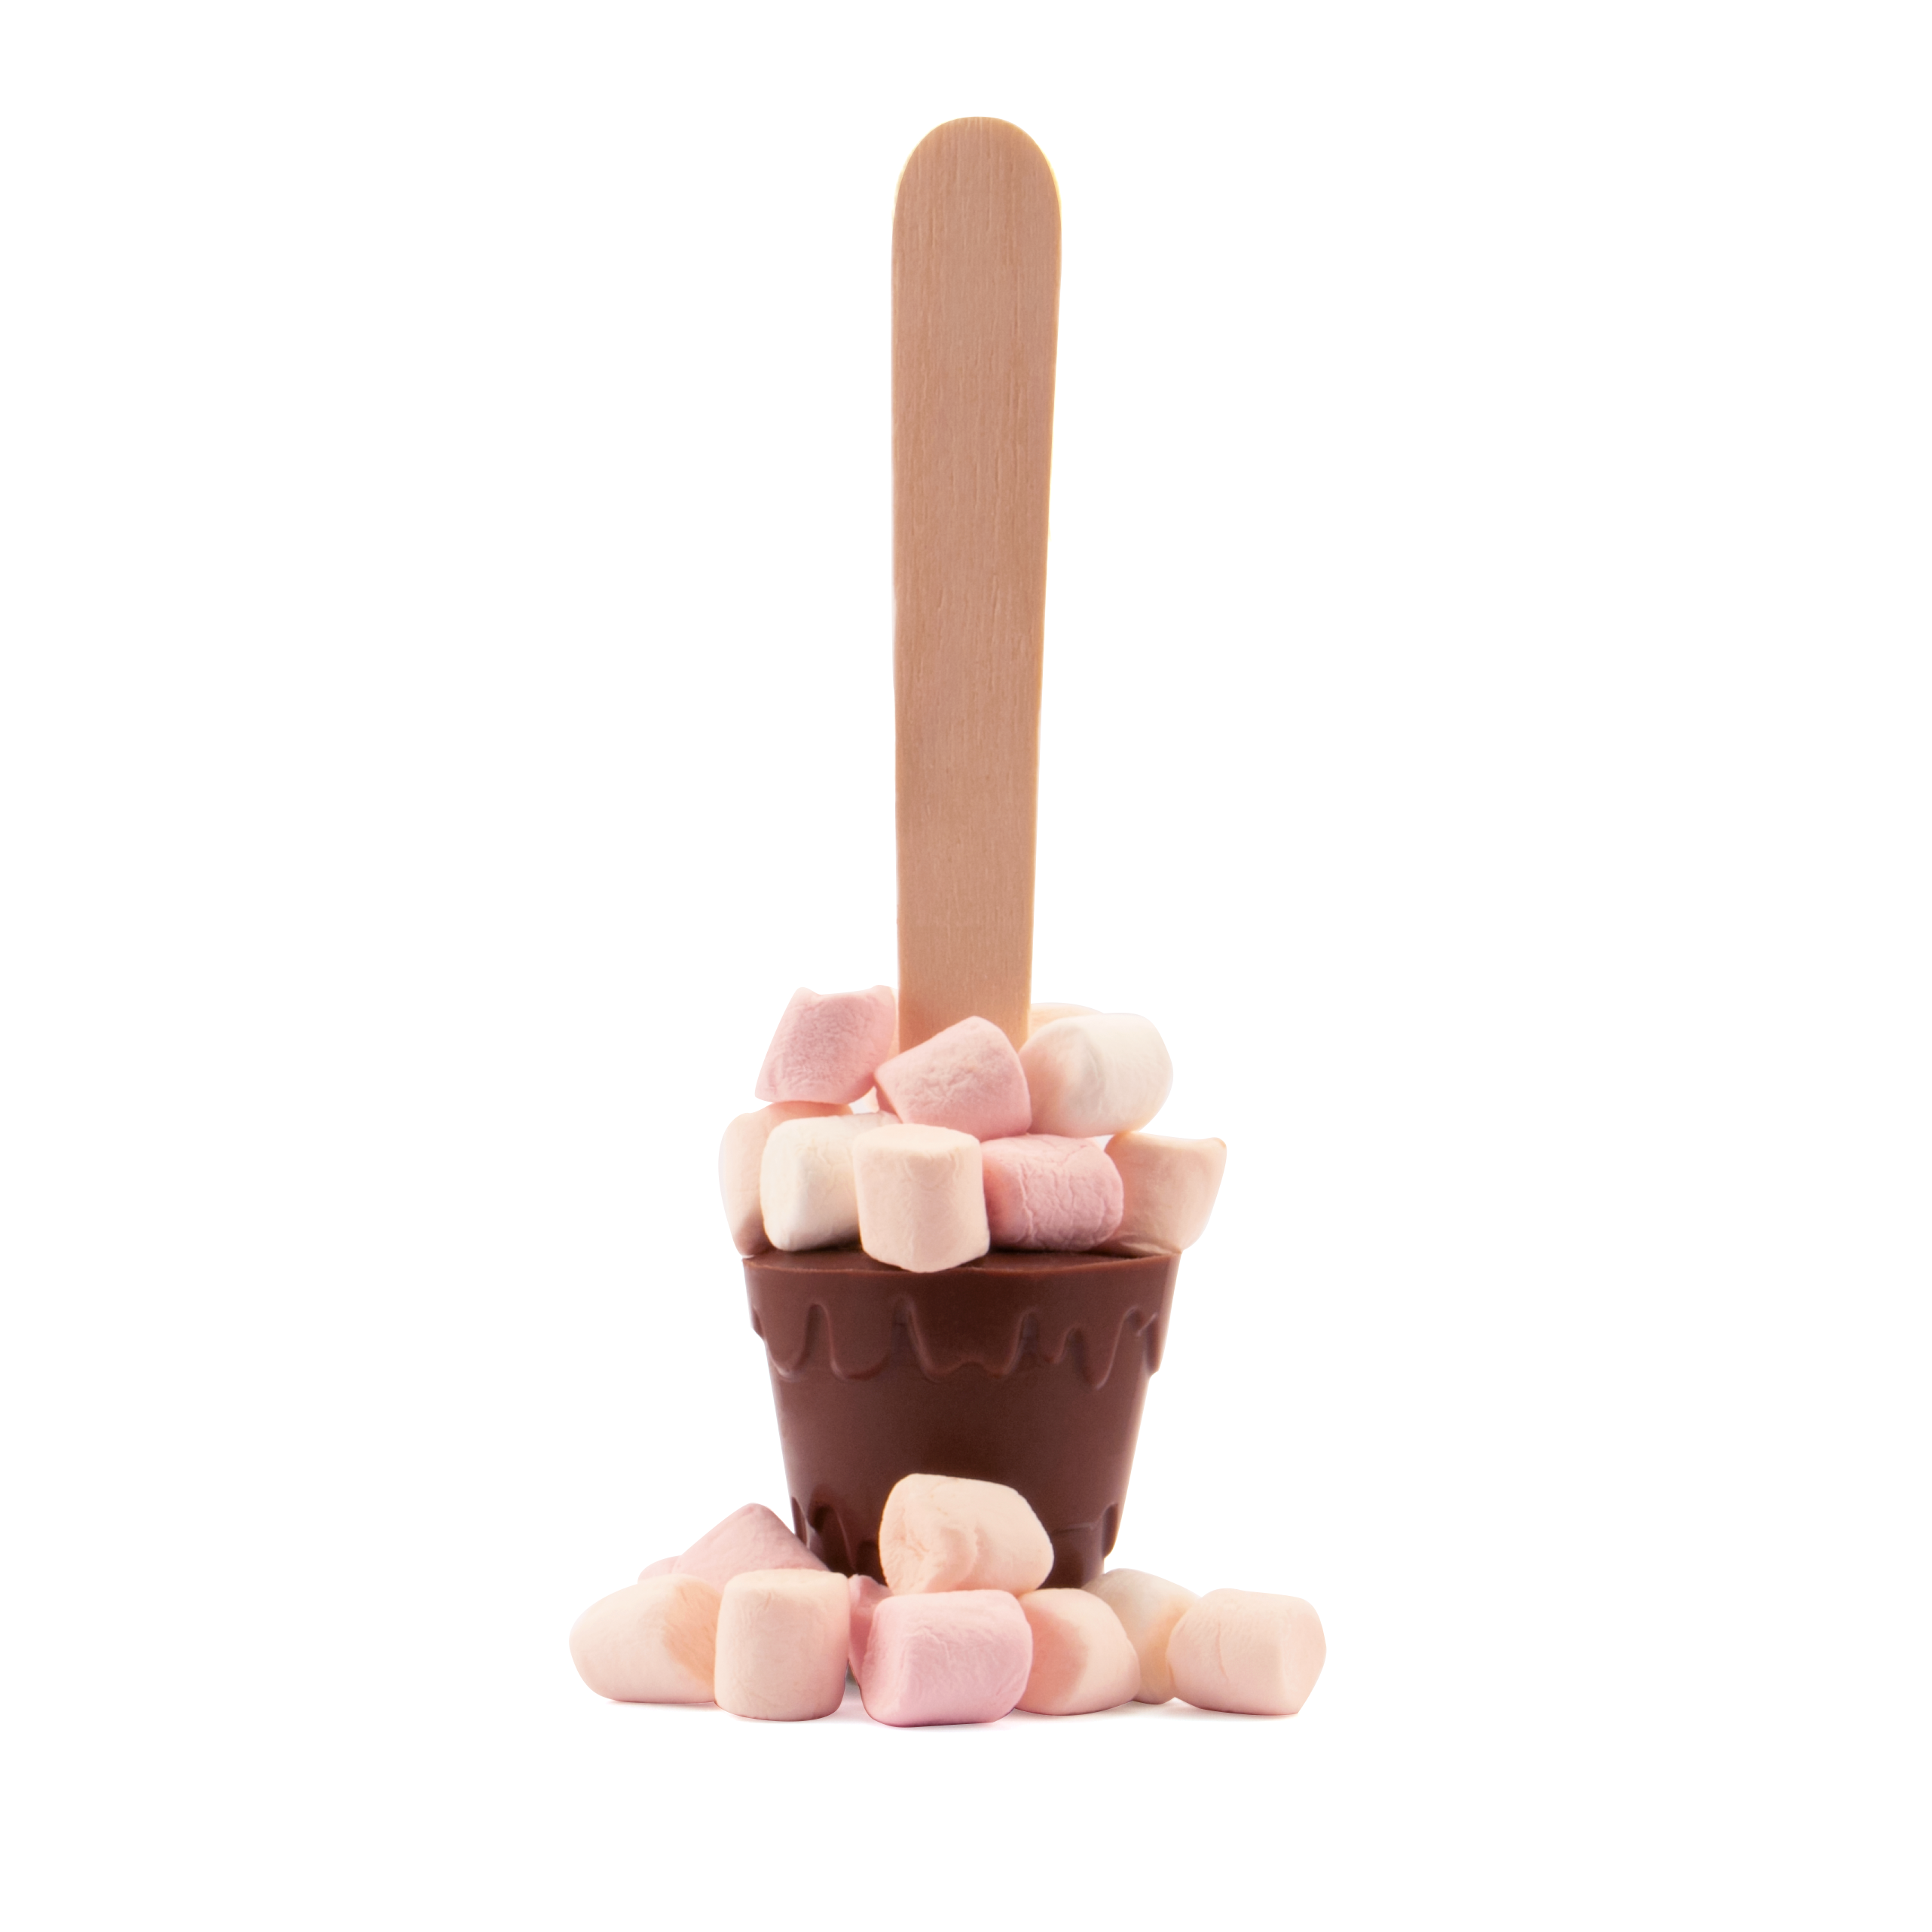 Eco Range - Info Card - Hot Chocolate Spoon - With Marshmallows